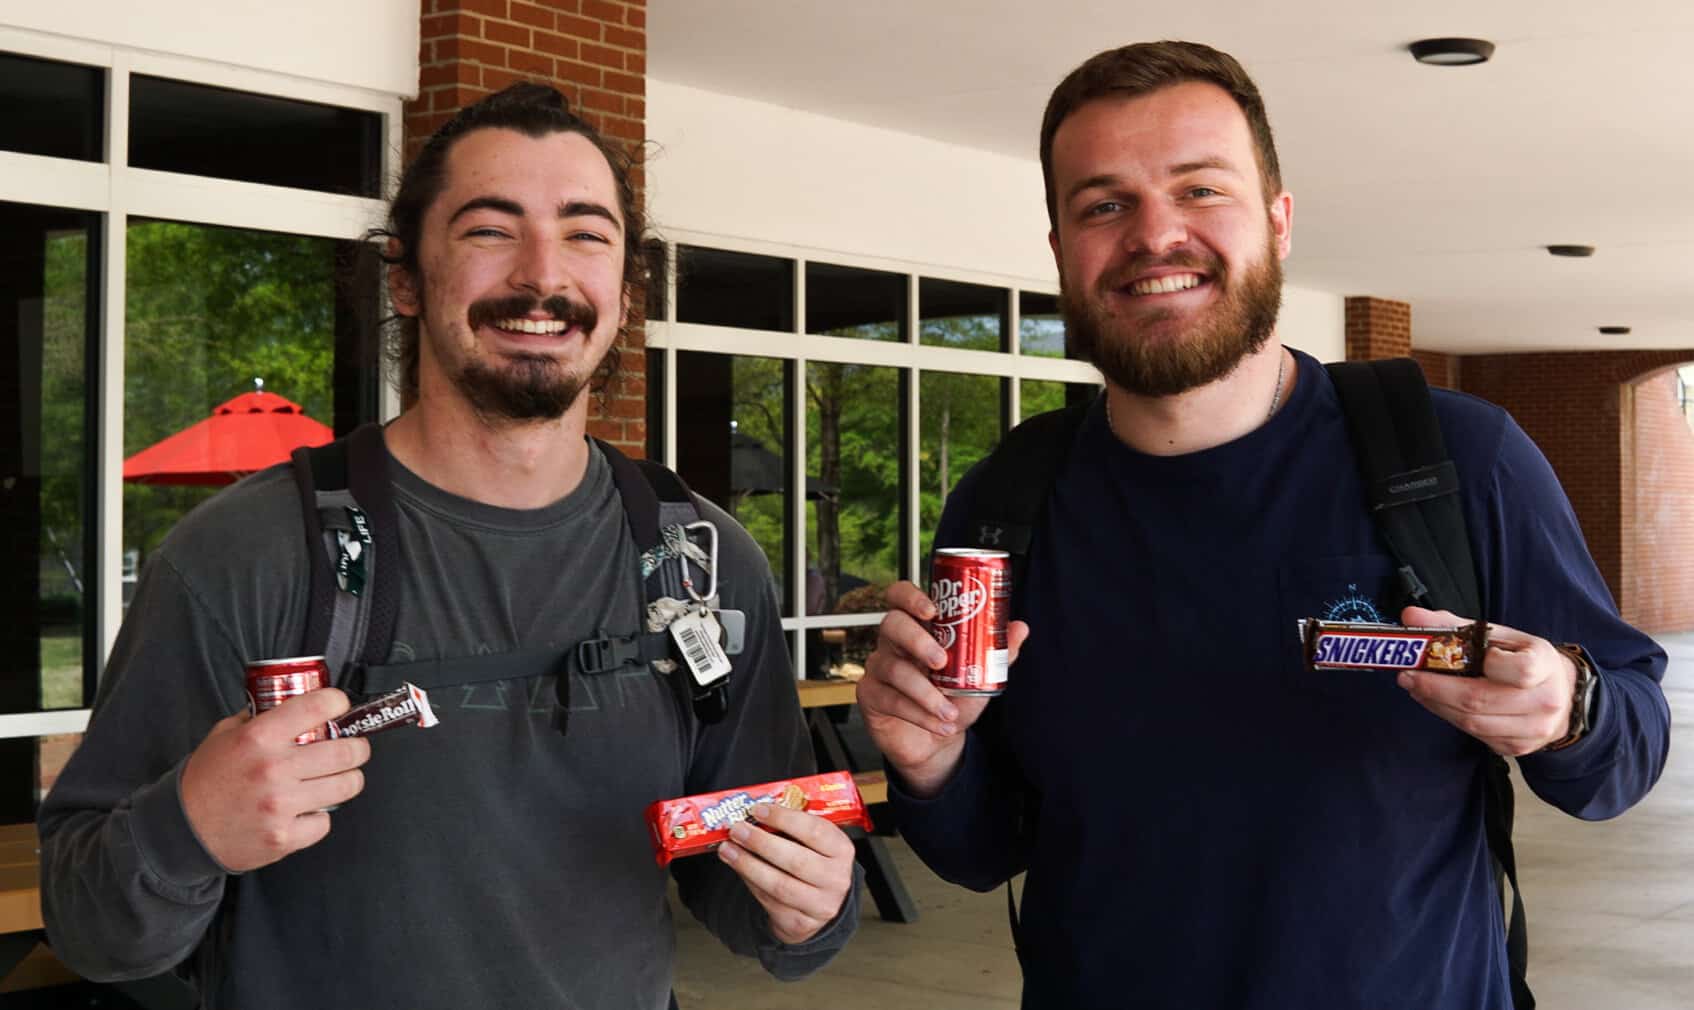 Senior Christian studies majors Ethan Pettigrew and Jacob Whitt come by to grab a few treats to enjoy their Thursday. Both are graduating this spring and are ready for the summer because of the exciting things happening. Pettigrew will be going over